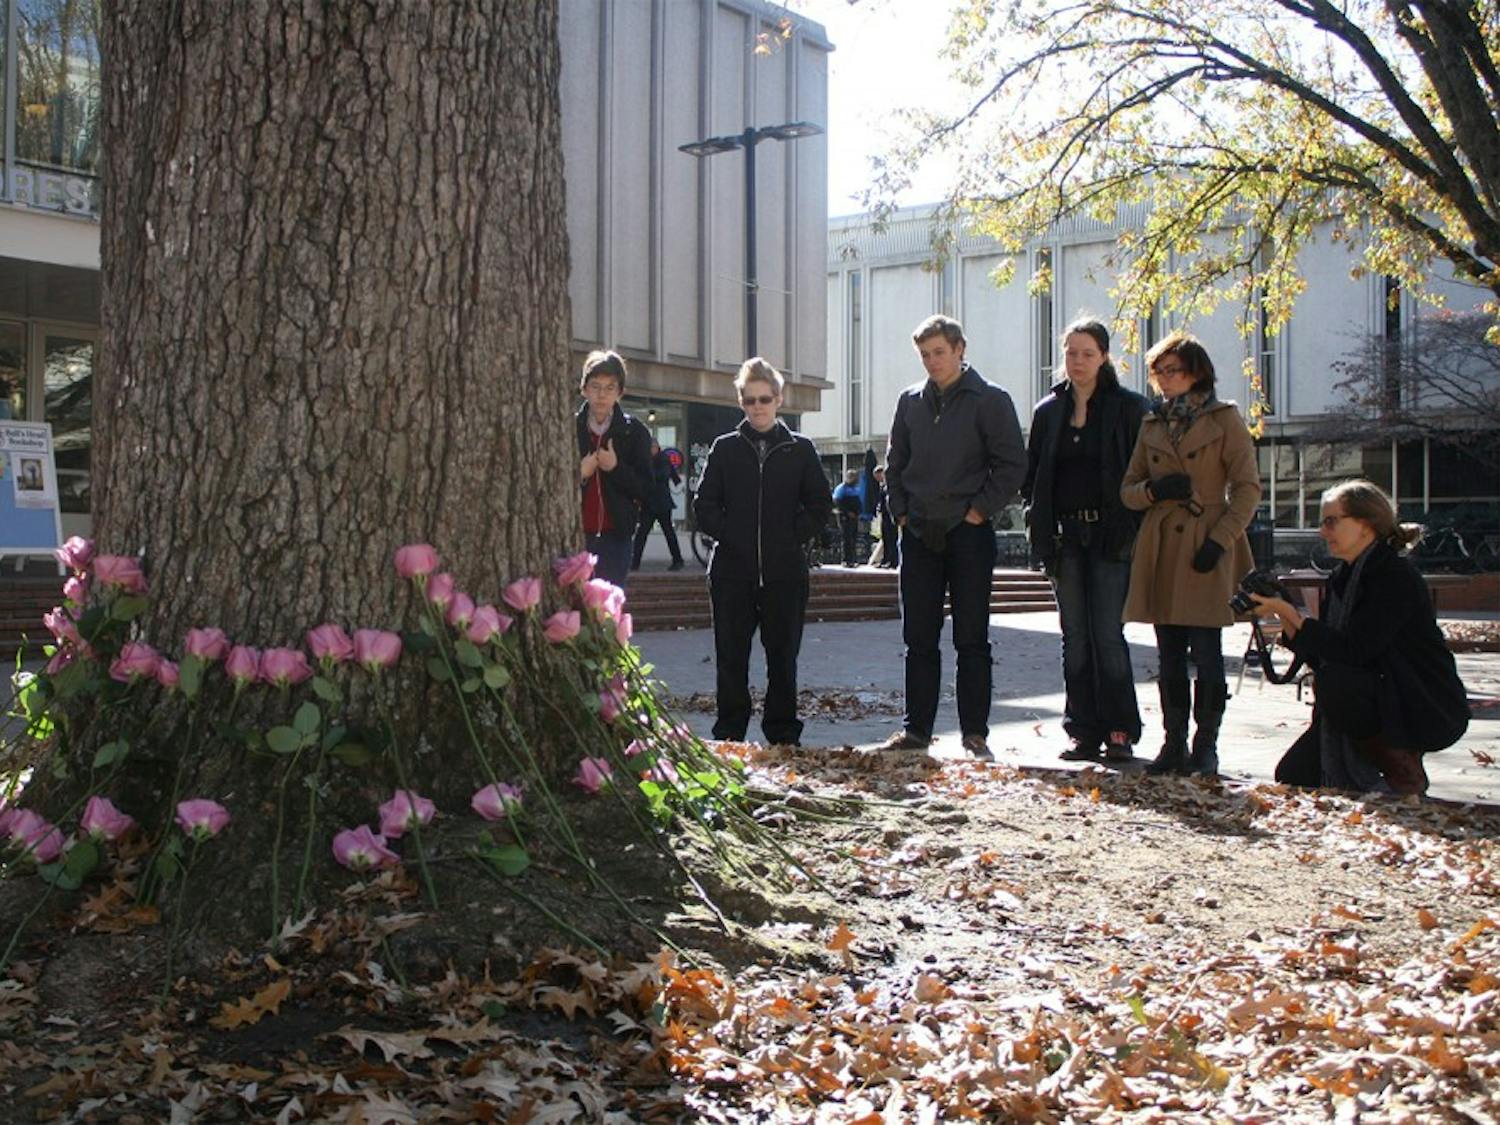 A group of on lookers pay their respects to those who have been persecuted because of their gender on Transgender Remembrance day, Wednesday afternoon in the Pit. 